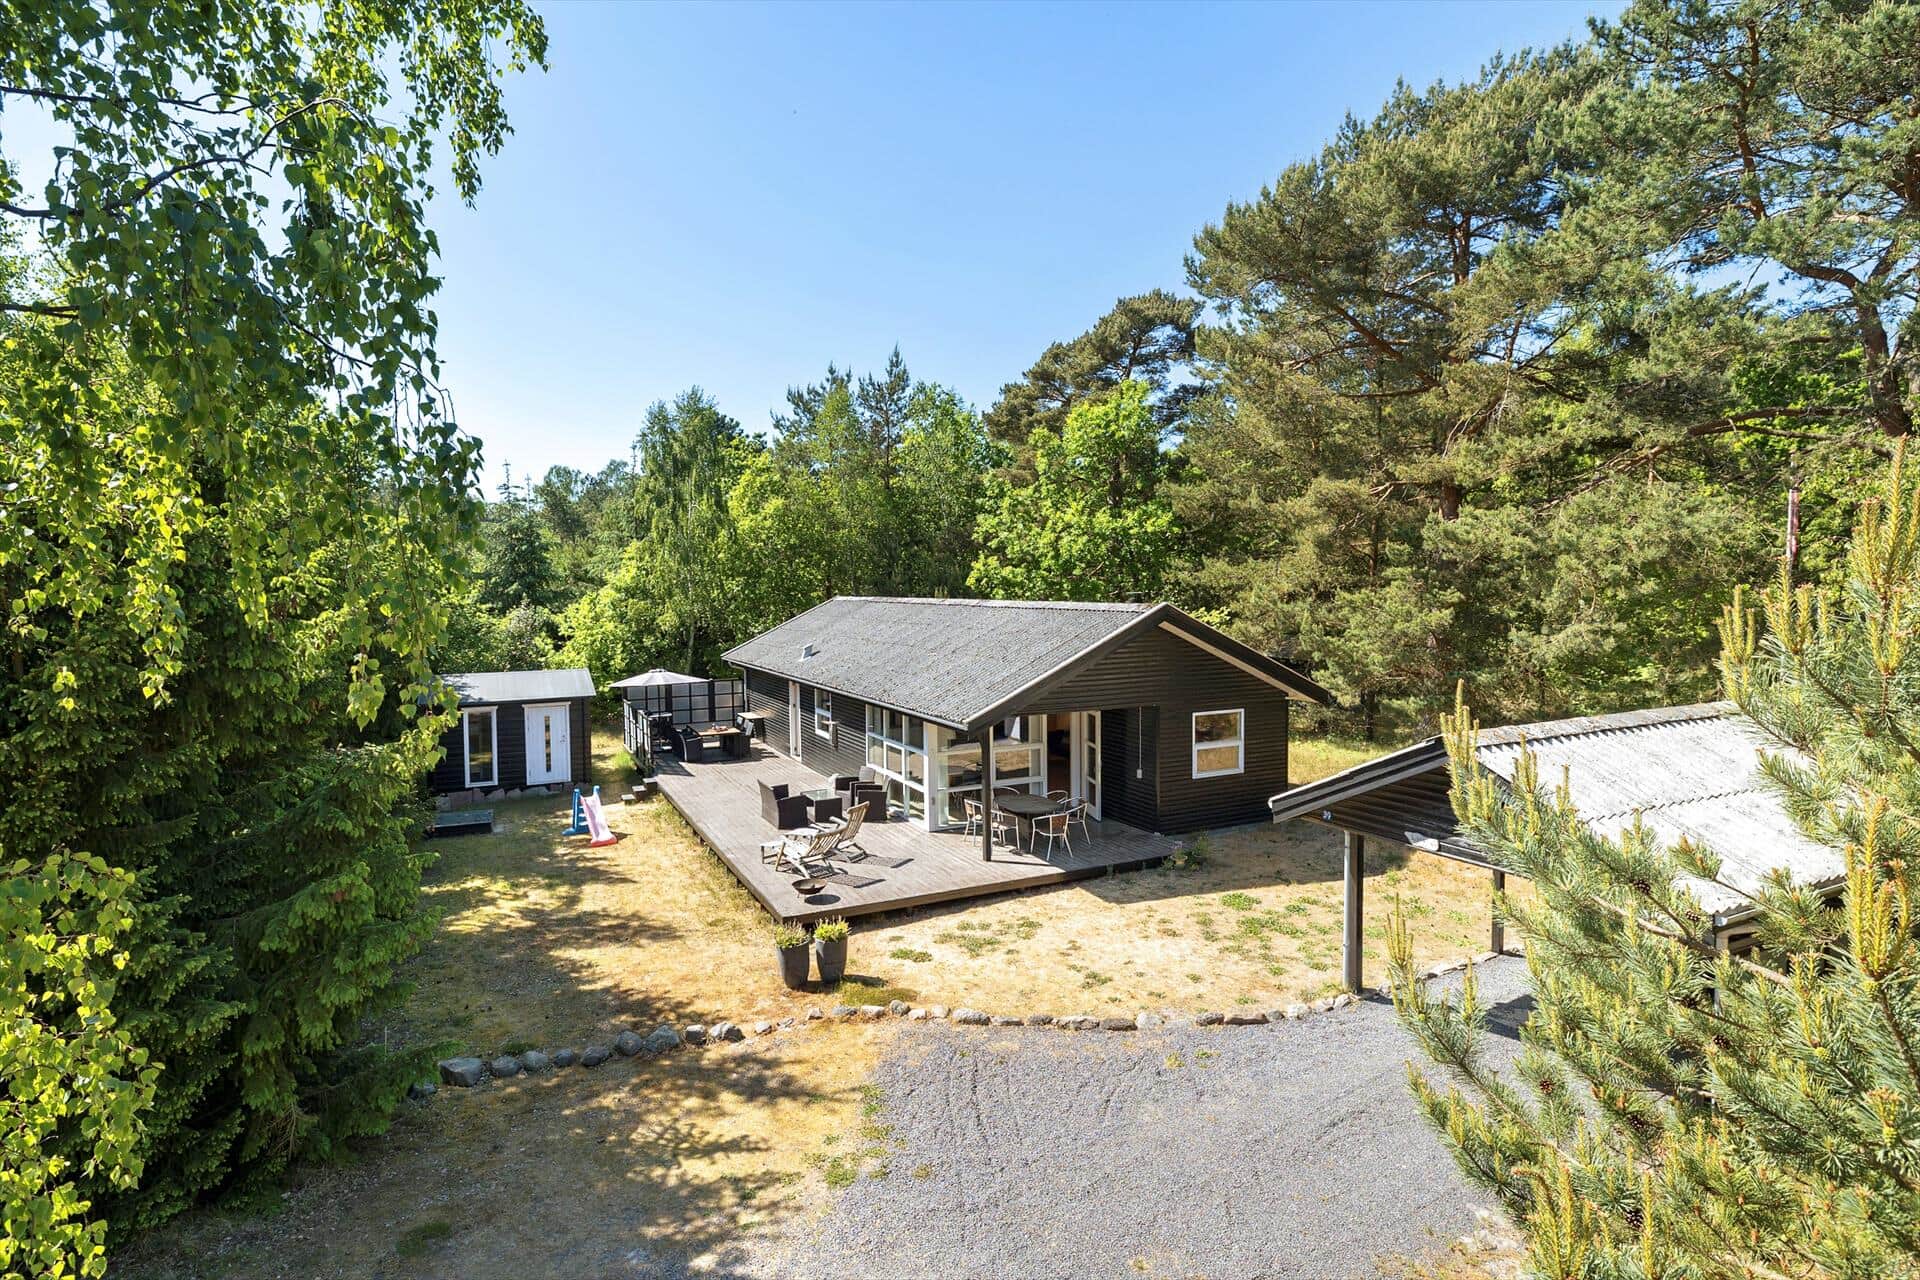 Image 0-10 Holiday-home 1501, Lyngvejen 39, DK - 3720 Aakirkeby